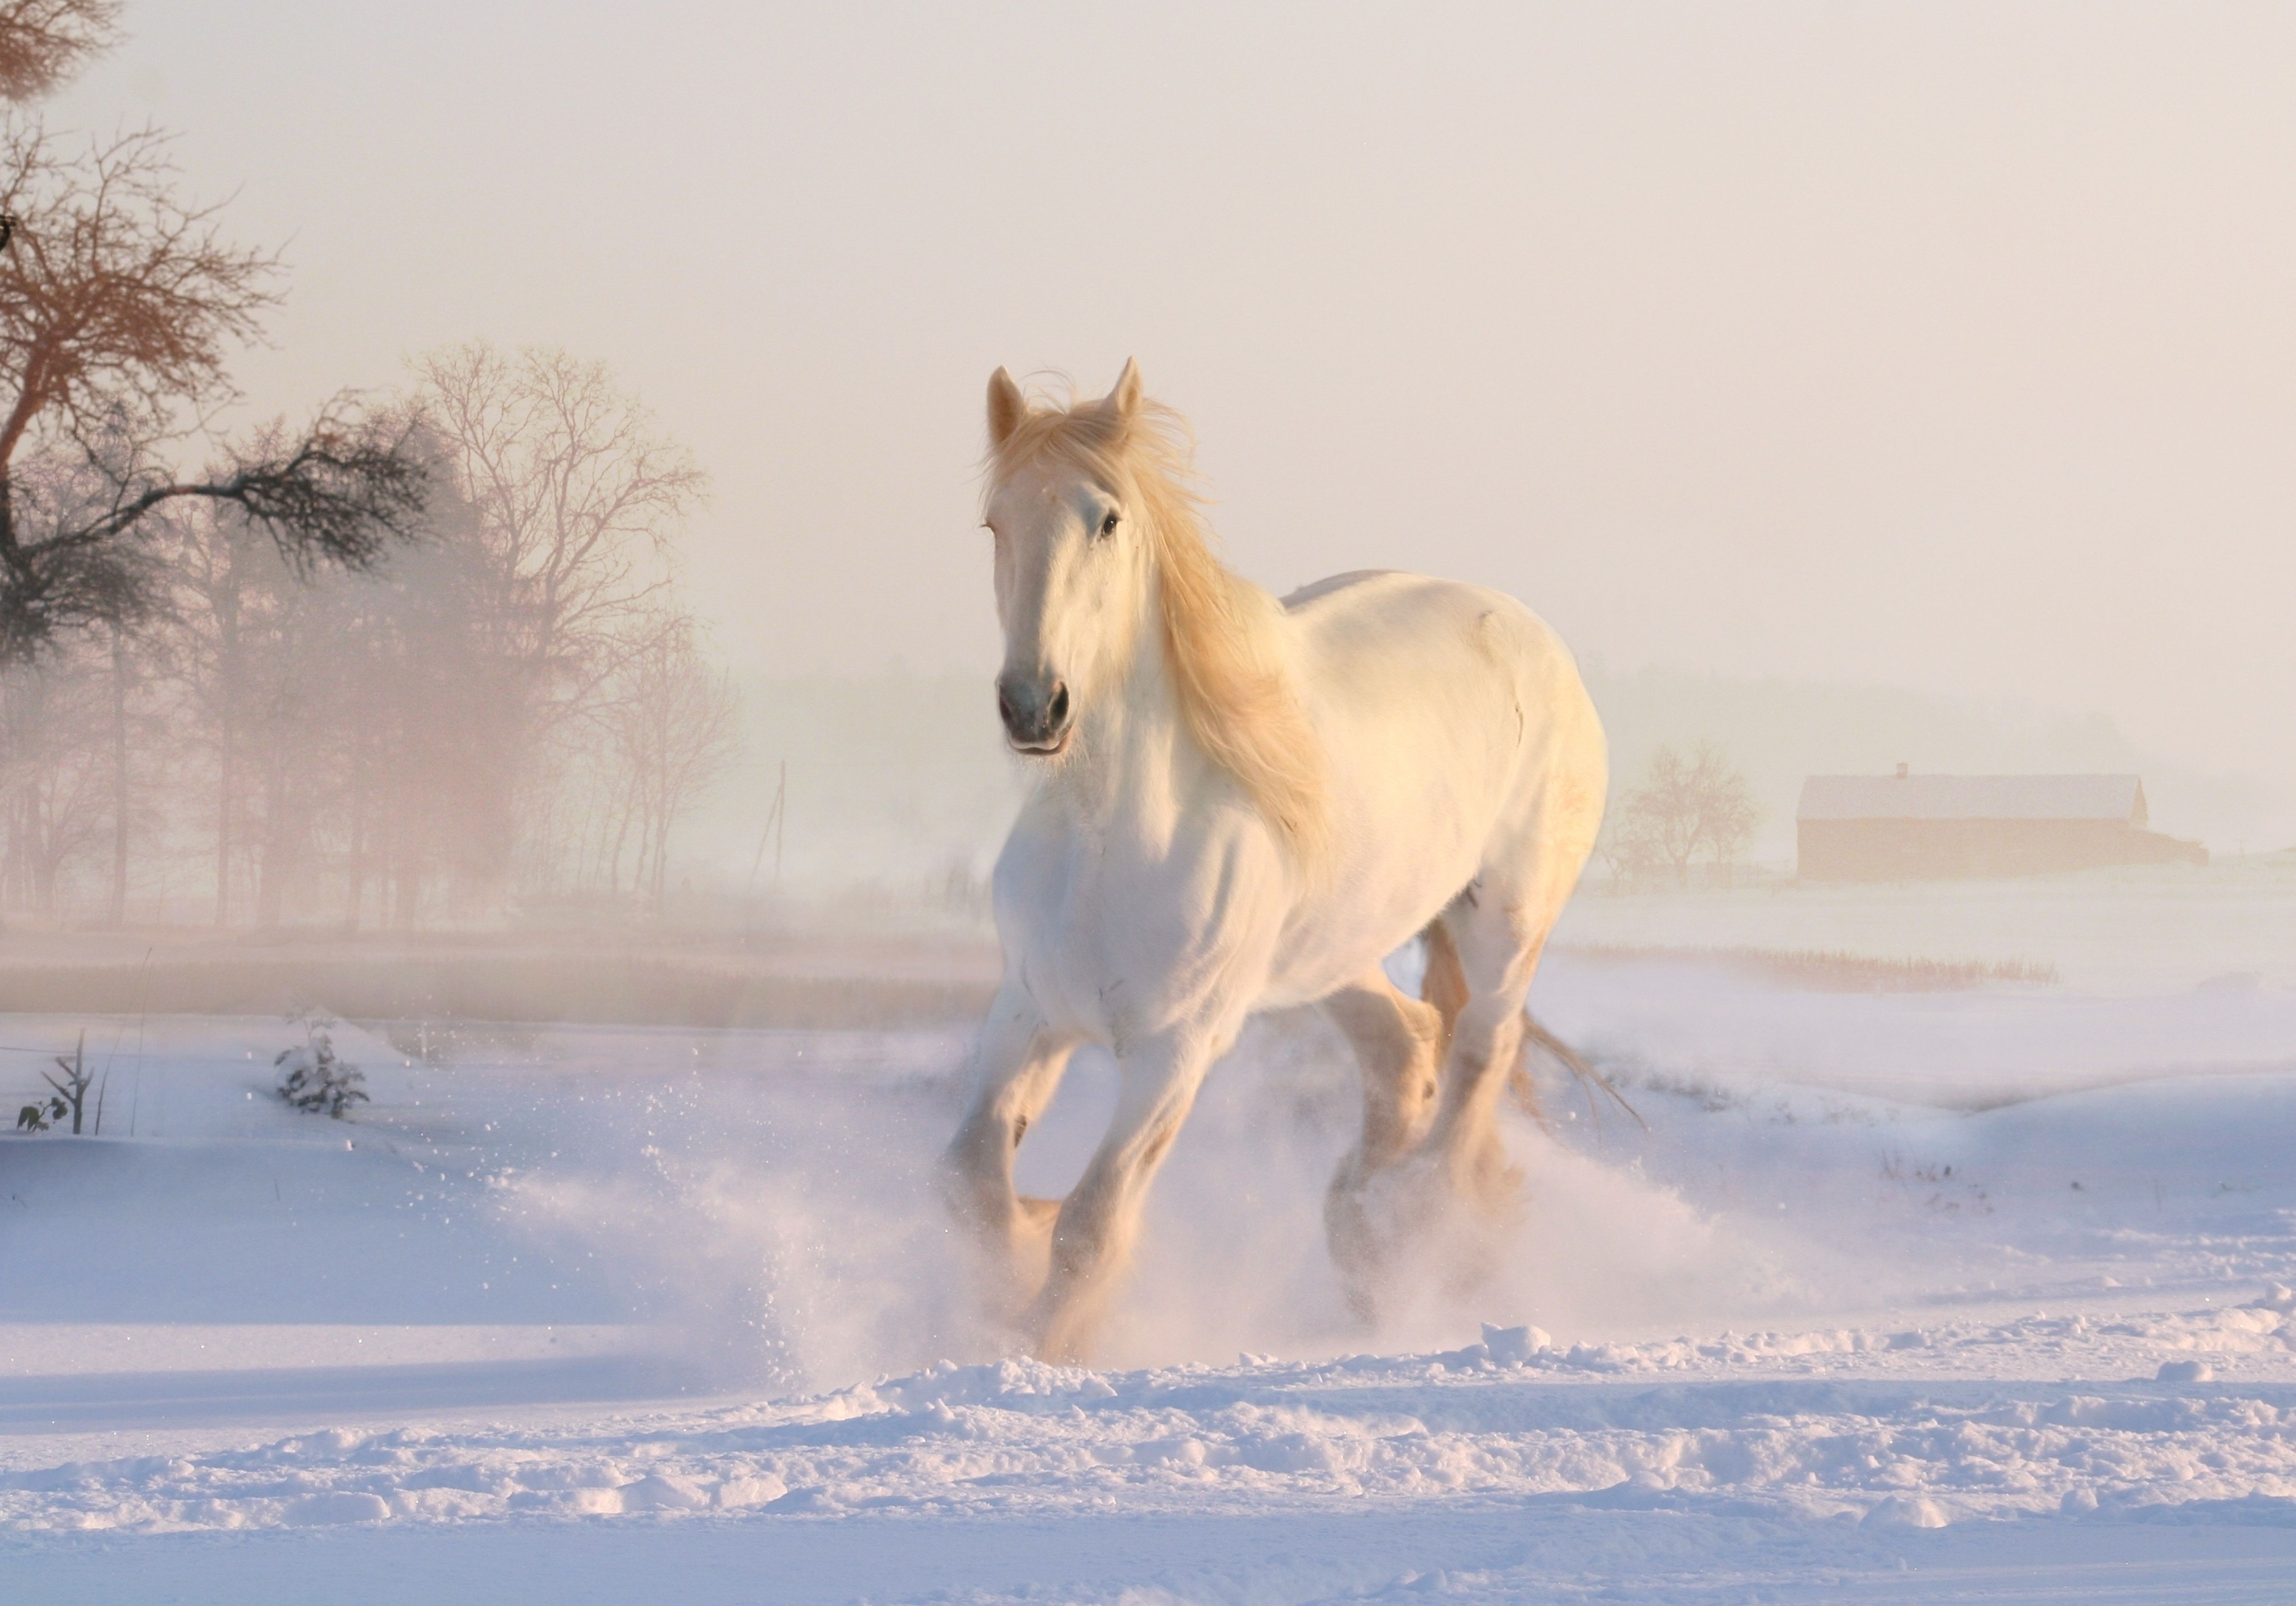 Galloping White Horse in the snow 4k Ultra HD Wallpaper. Background